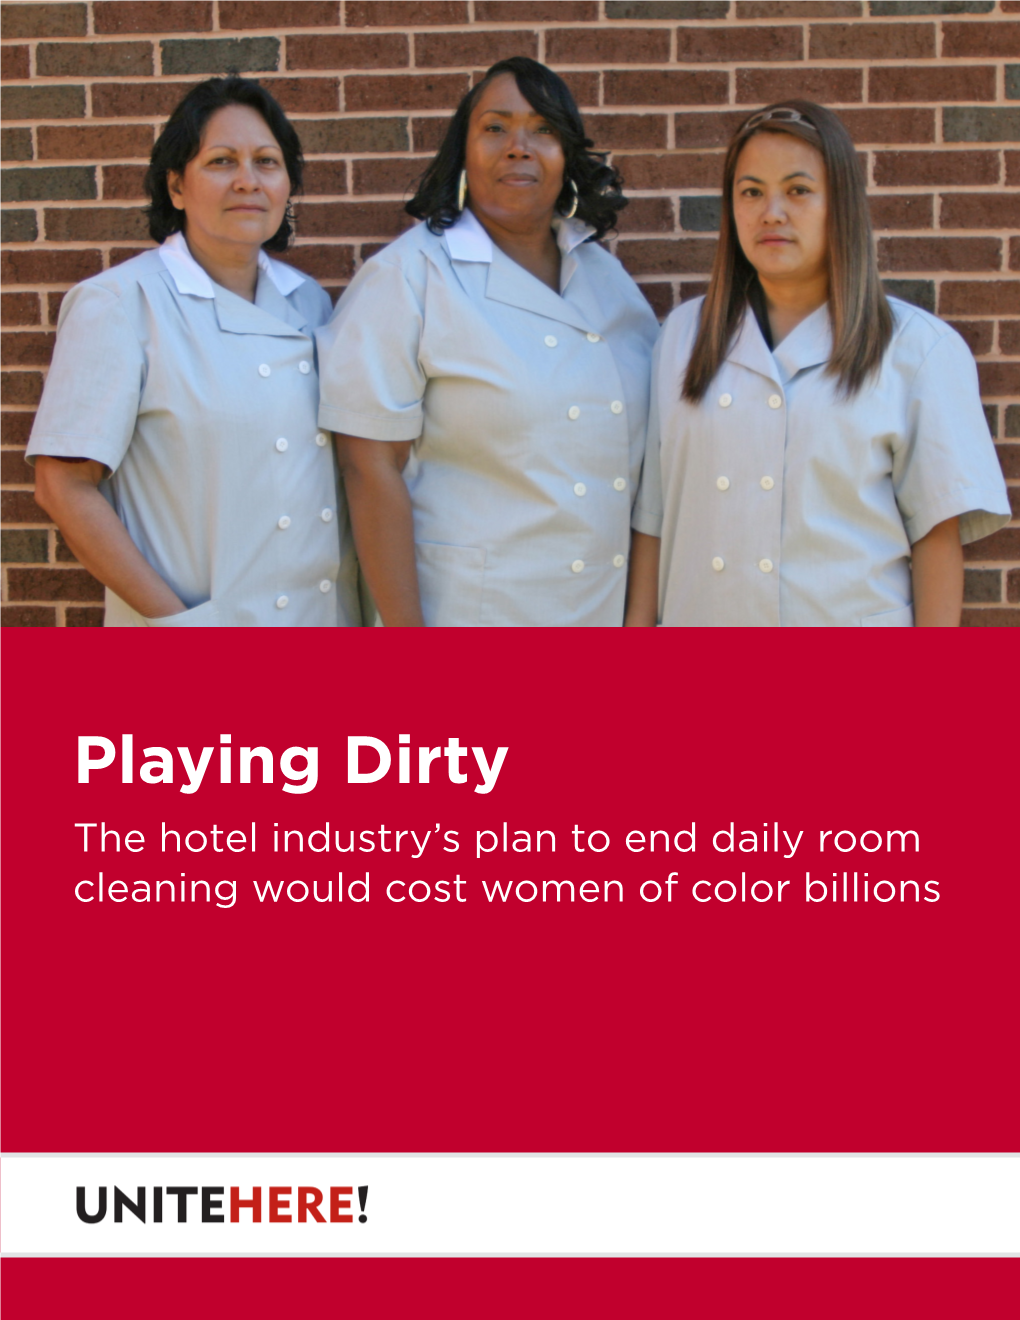 Playing Dirty the Hotel Industry’S Plan to End Daily Room Cleaning Would Cost Women of Color Billions